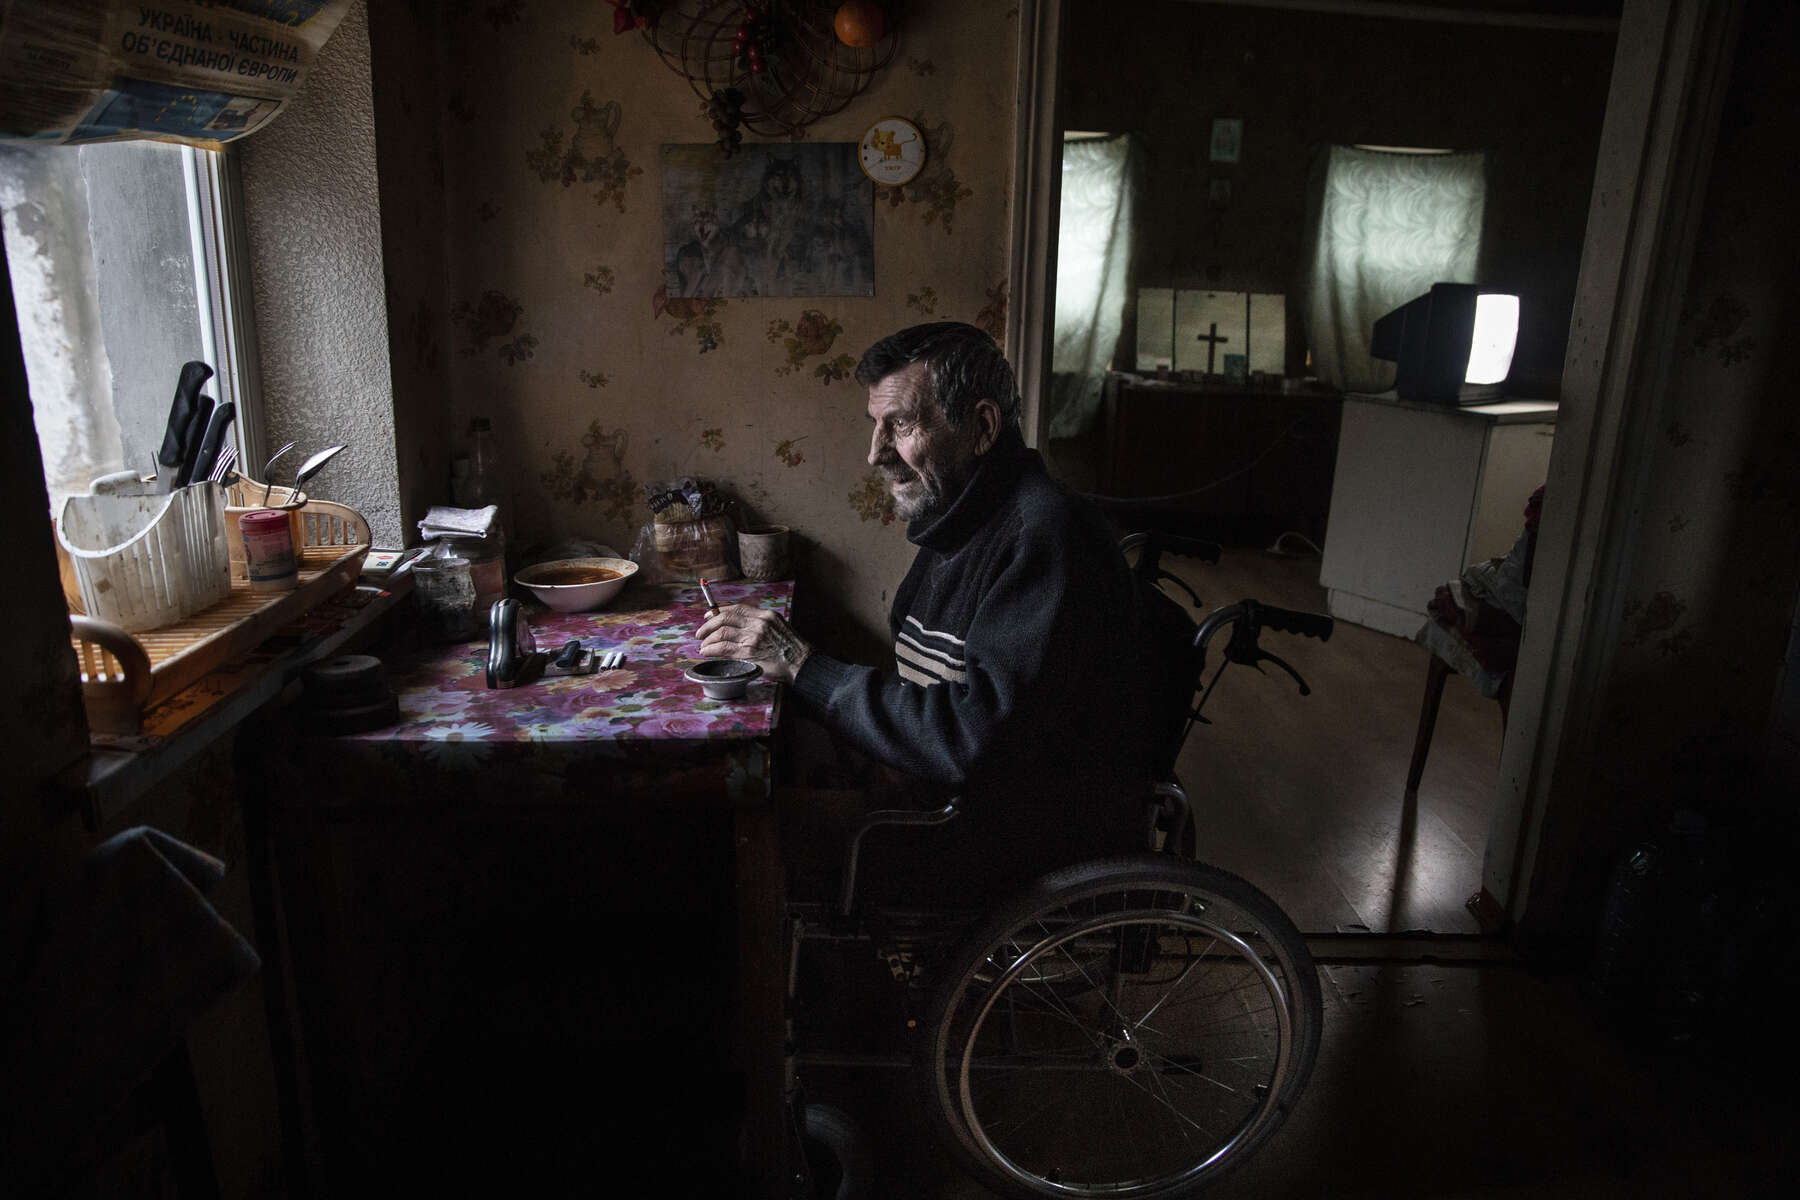 Avdiivka: Vladimir Mamoshyn, age 65, sits in his wheelchair, his wife died in 2010, now he lives alone, his children abandoned him. He resides in the war-torn  Avdiivka village, less than a kilometer from the contact line where daily shelling and gunfire can be heard. In 2016, Vladimir lost his leg due to a vascular disease, with poor access to health facilities along with inadequate health care. After having a heart attack a few months later in 2017 he lost the use of his left hand, now he lives in a wheelchair depending on family and  friends to help him.